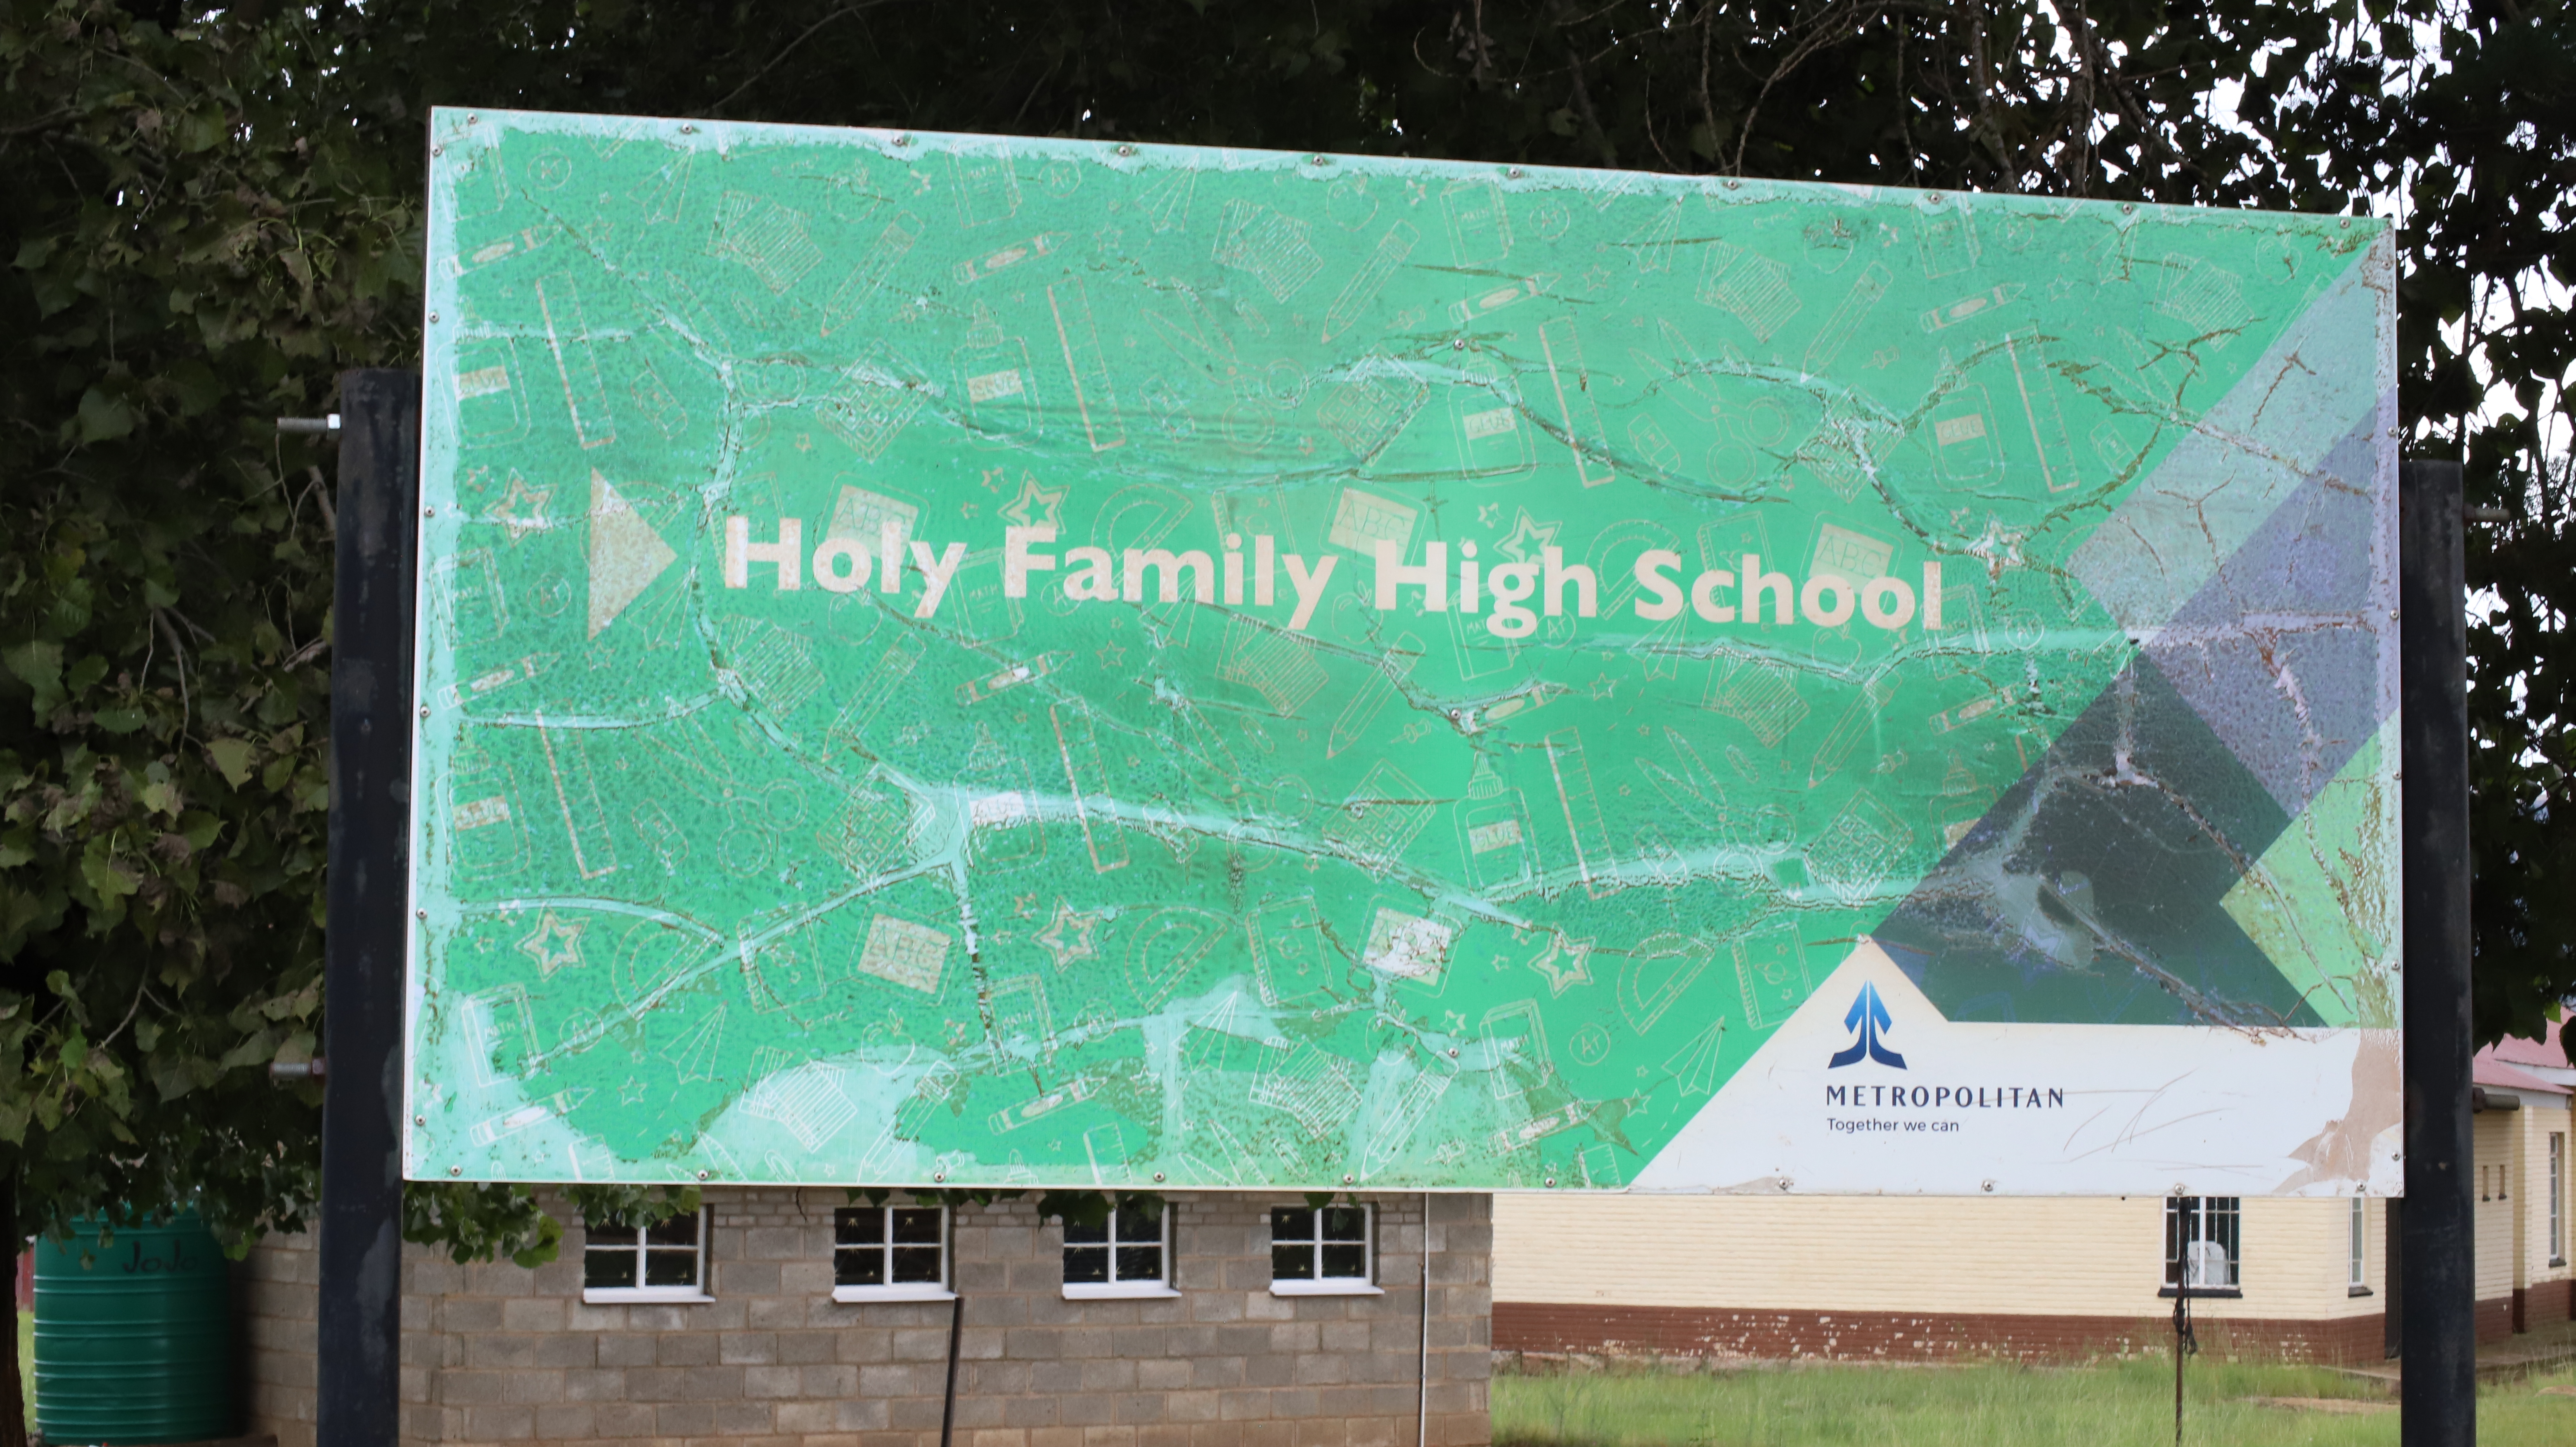 Holy Family High School sign, Lesotho: The sewing project that Sr. Victoria Mota started is located at Holy Family High School in Leribe, Lesotho. She started the sewing project in 2015 to empower youths and ensure they come out of poverty. 